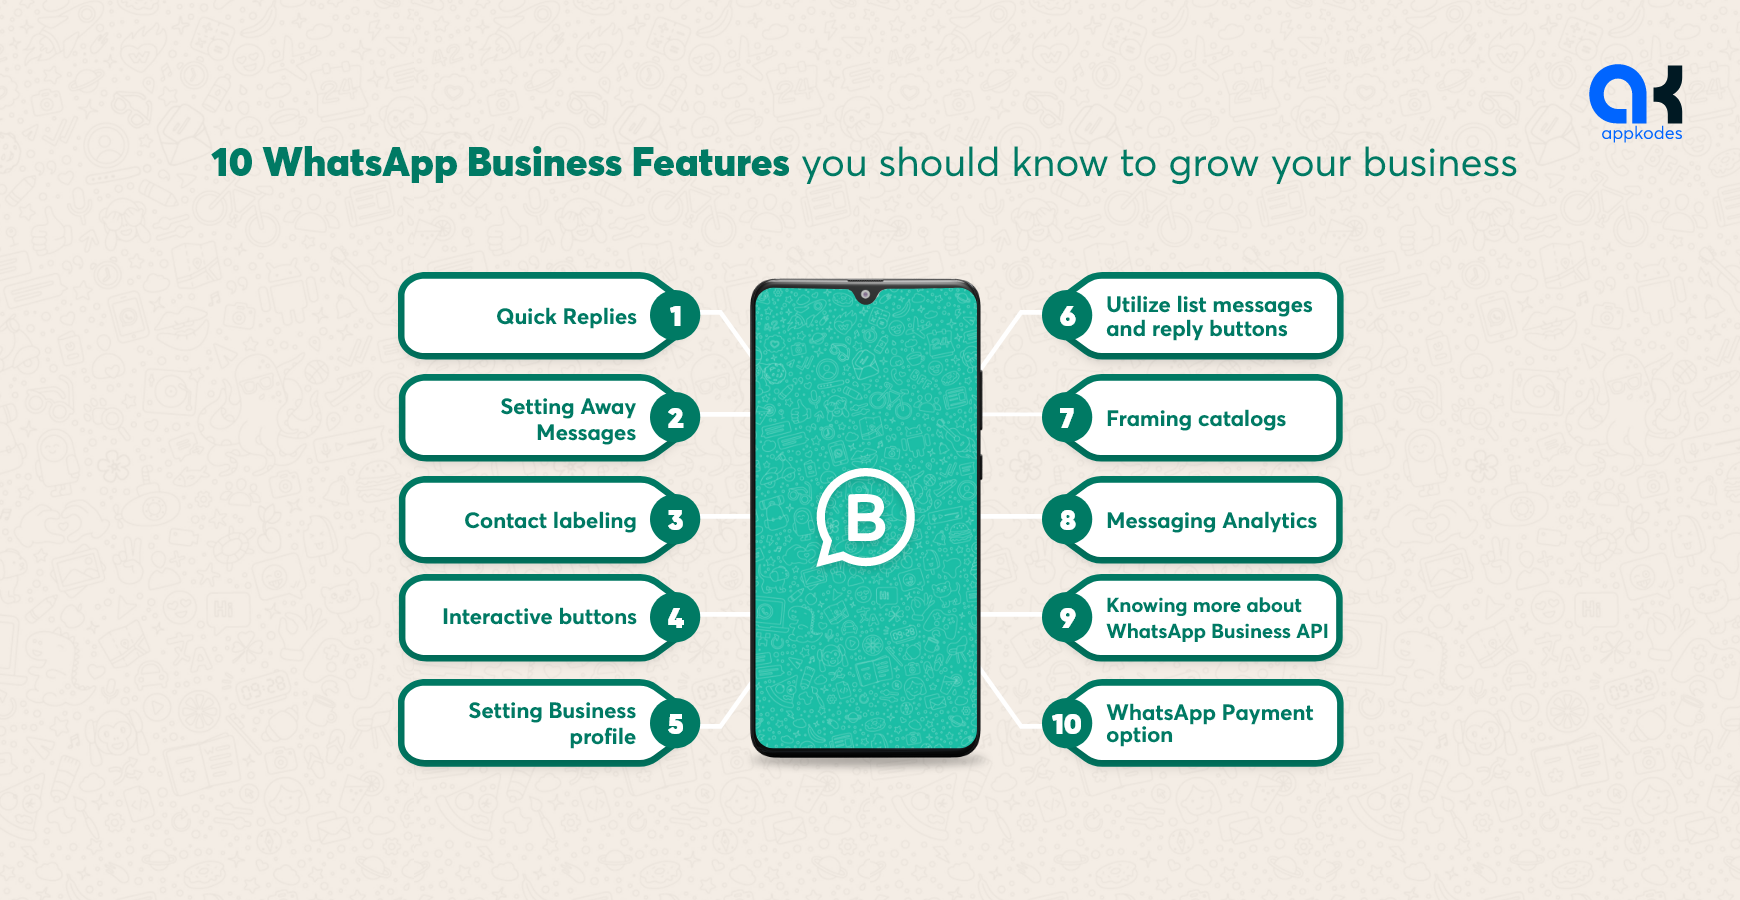 WhatsApp Business Features